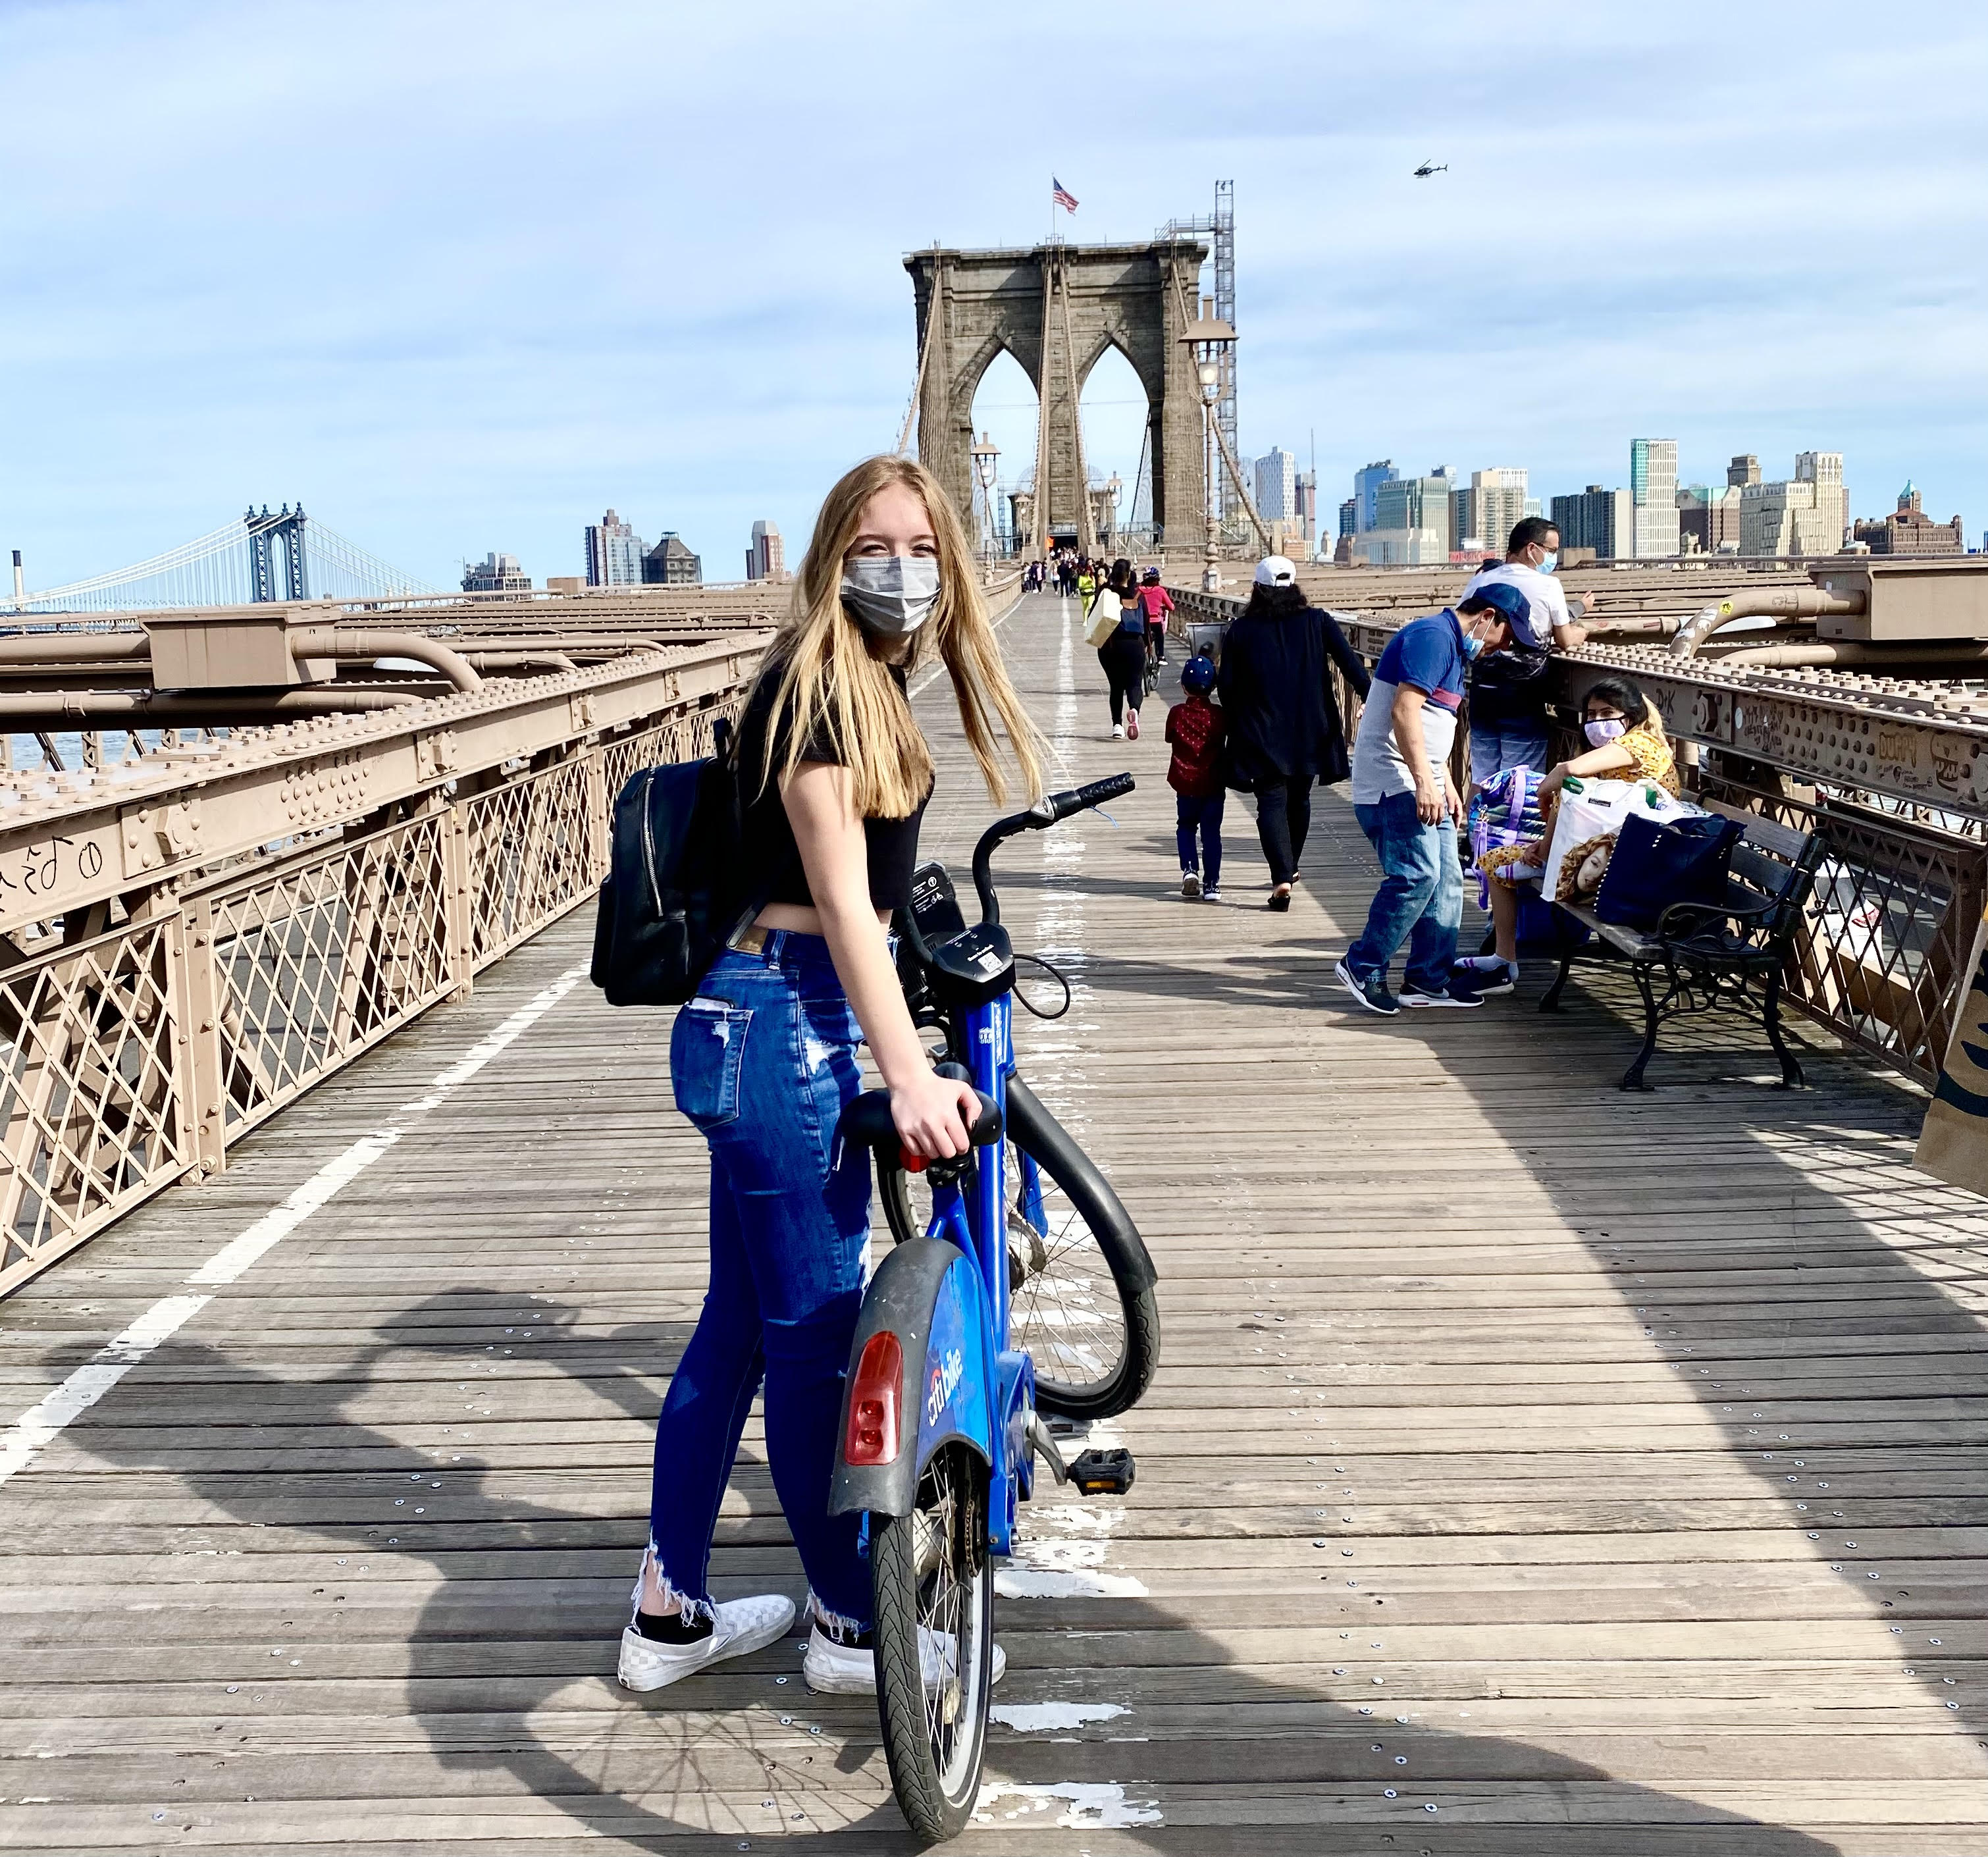 Biking across the Brooklyn Bridge is one of most fun things to do in NYC and a great workout ;)